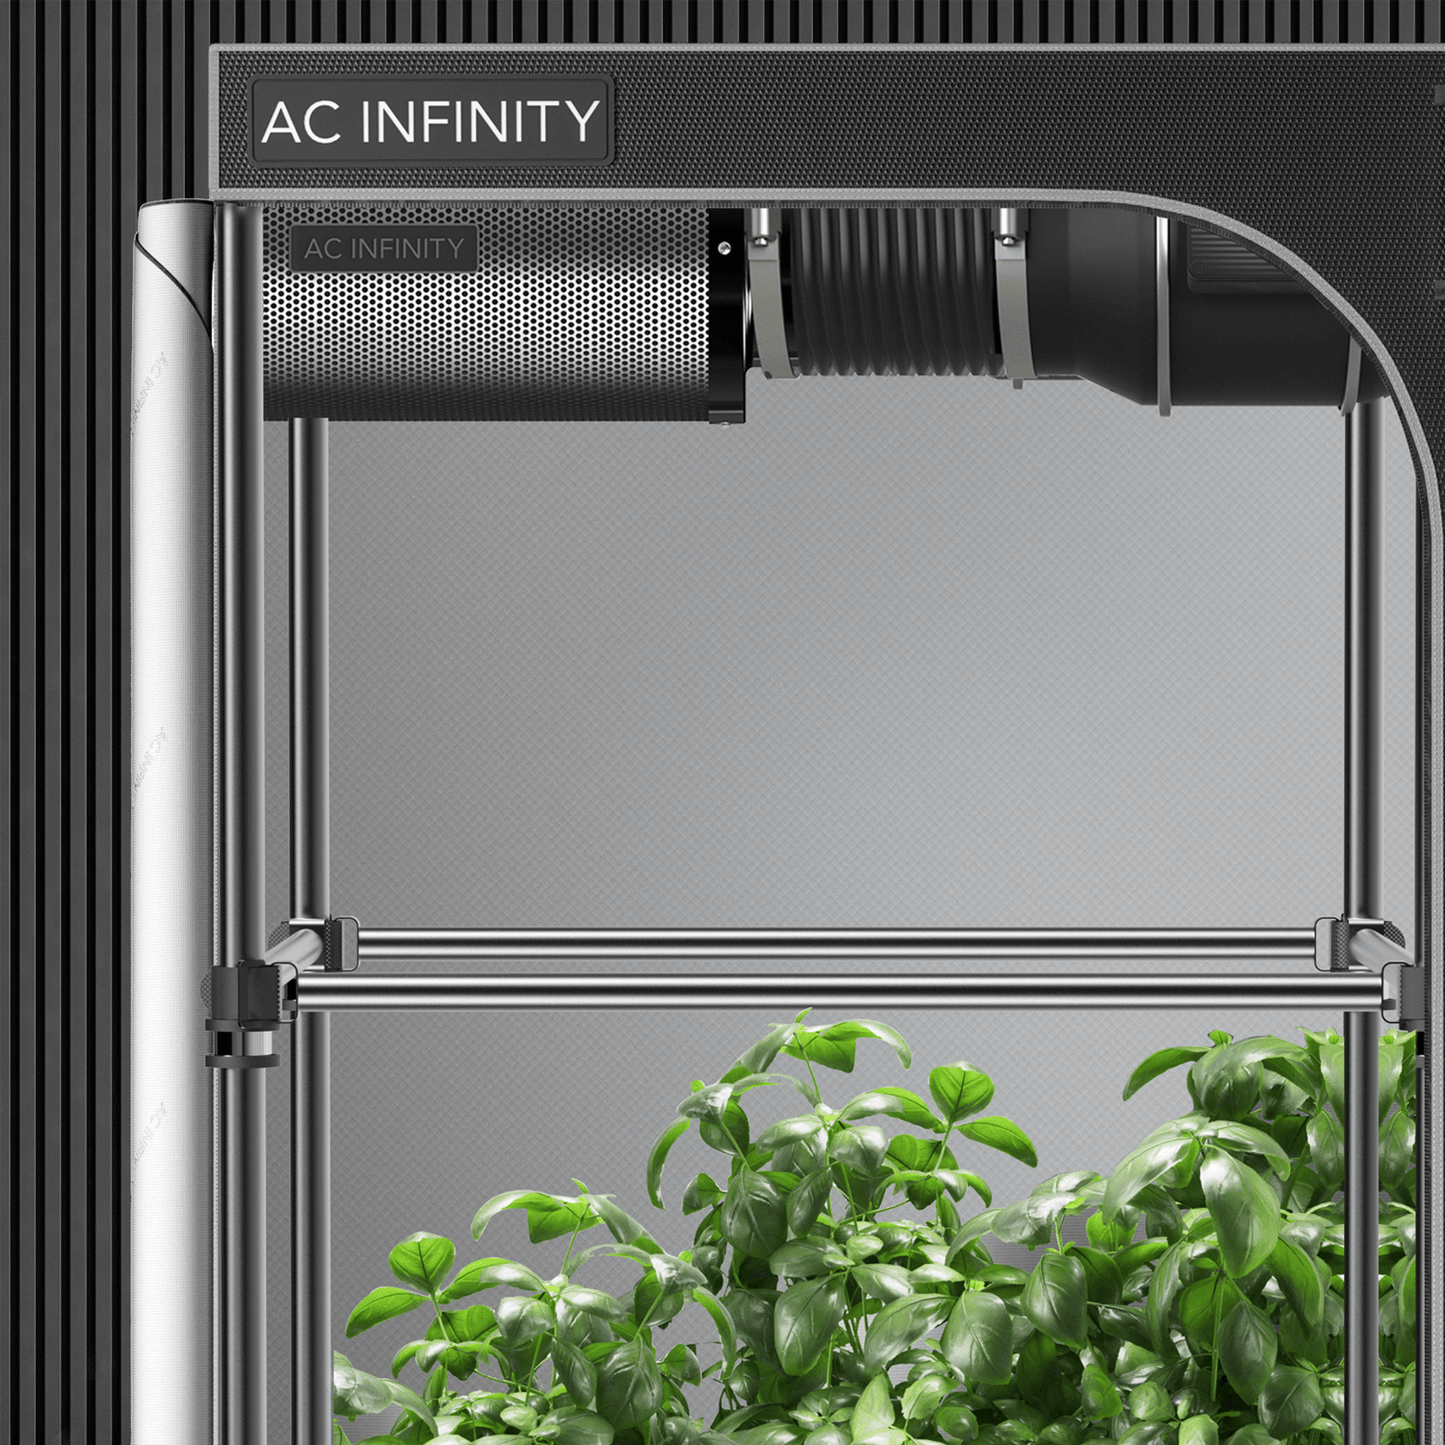 AC Infinity Grow Tent Mounting Bars, for Indoor Grow Spaces, 2x4' AC-HCA24 Grow Tents